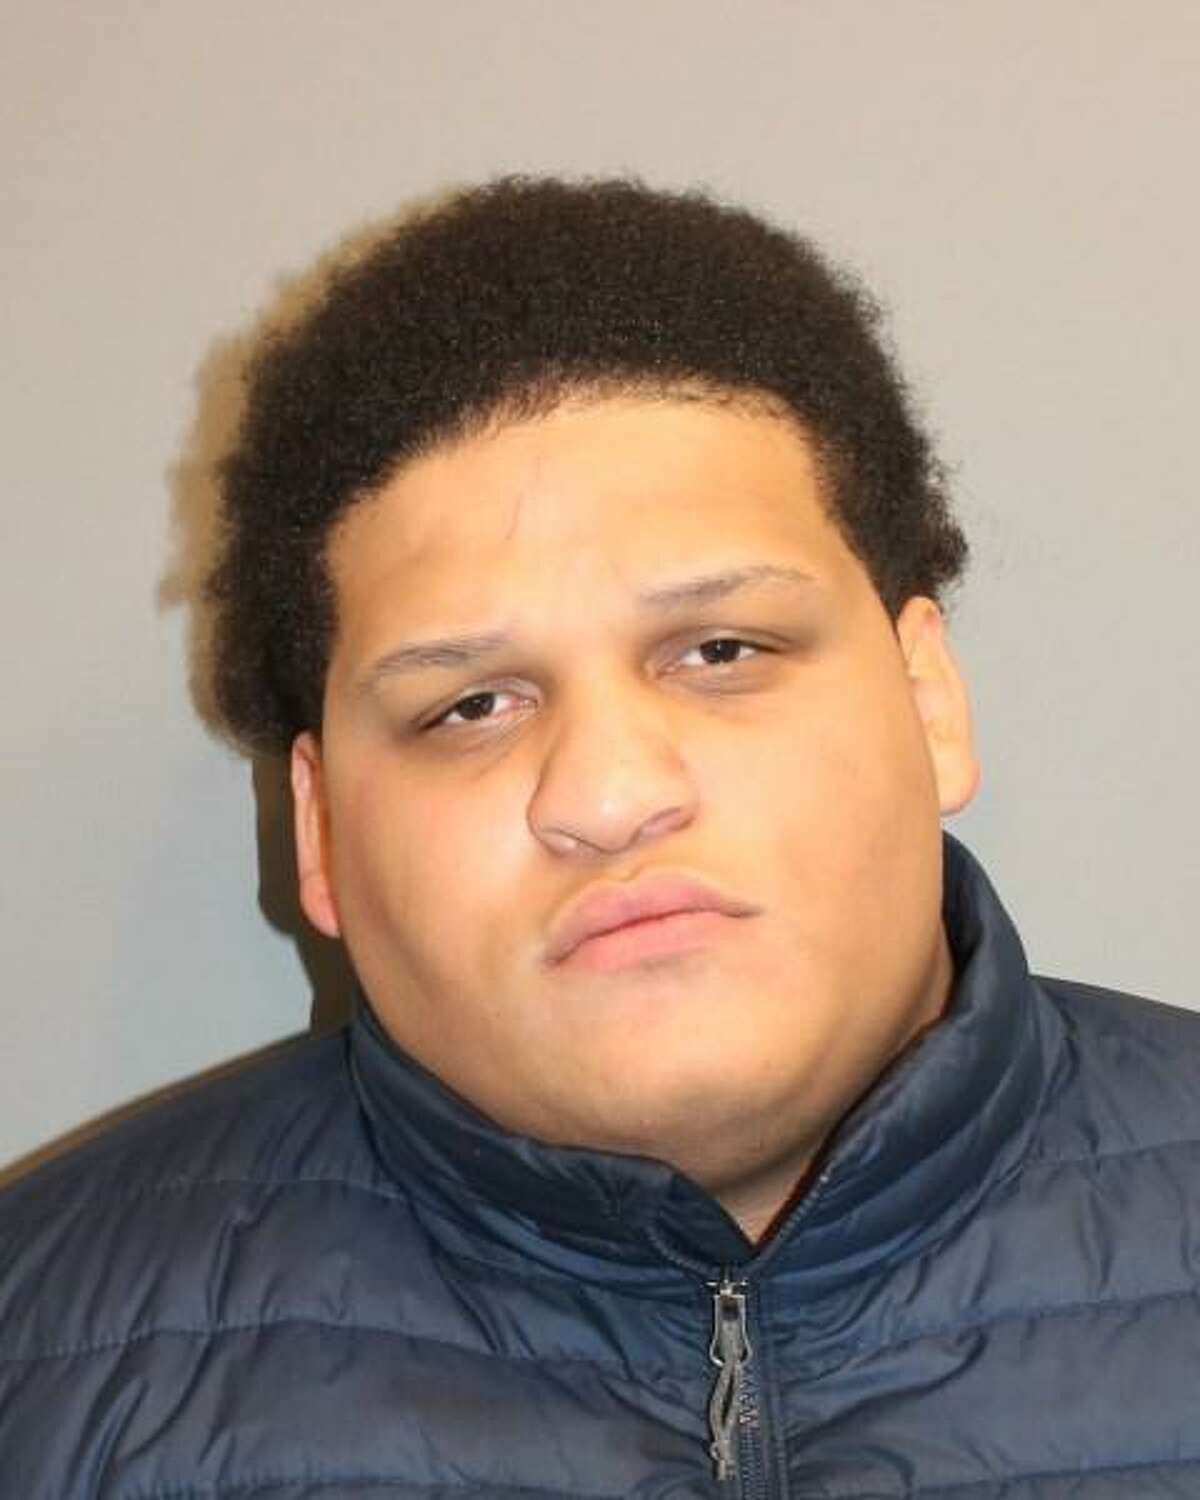 Gabriel Banegas, 19, of Highview Avenue, Stamford, and Jeremy Jimenez, 19, of Monterey Place, Norwalk, were arrested “after a lengthy investigation” into a March 11 armed robbery at the Colonial Village Housing Complex, according to a release from Lt. Terrence Blake.